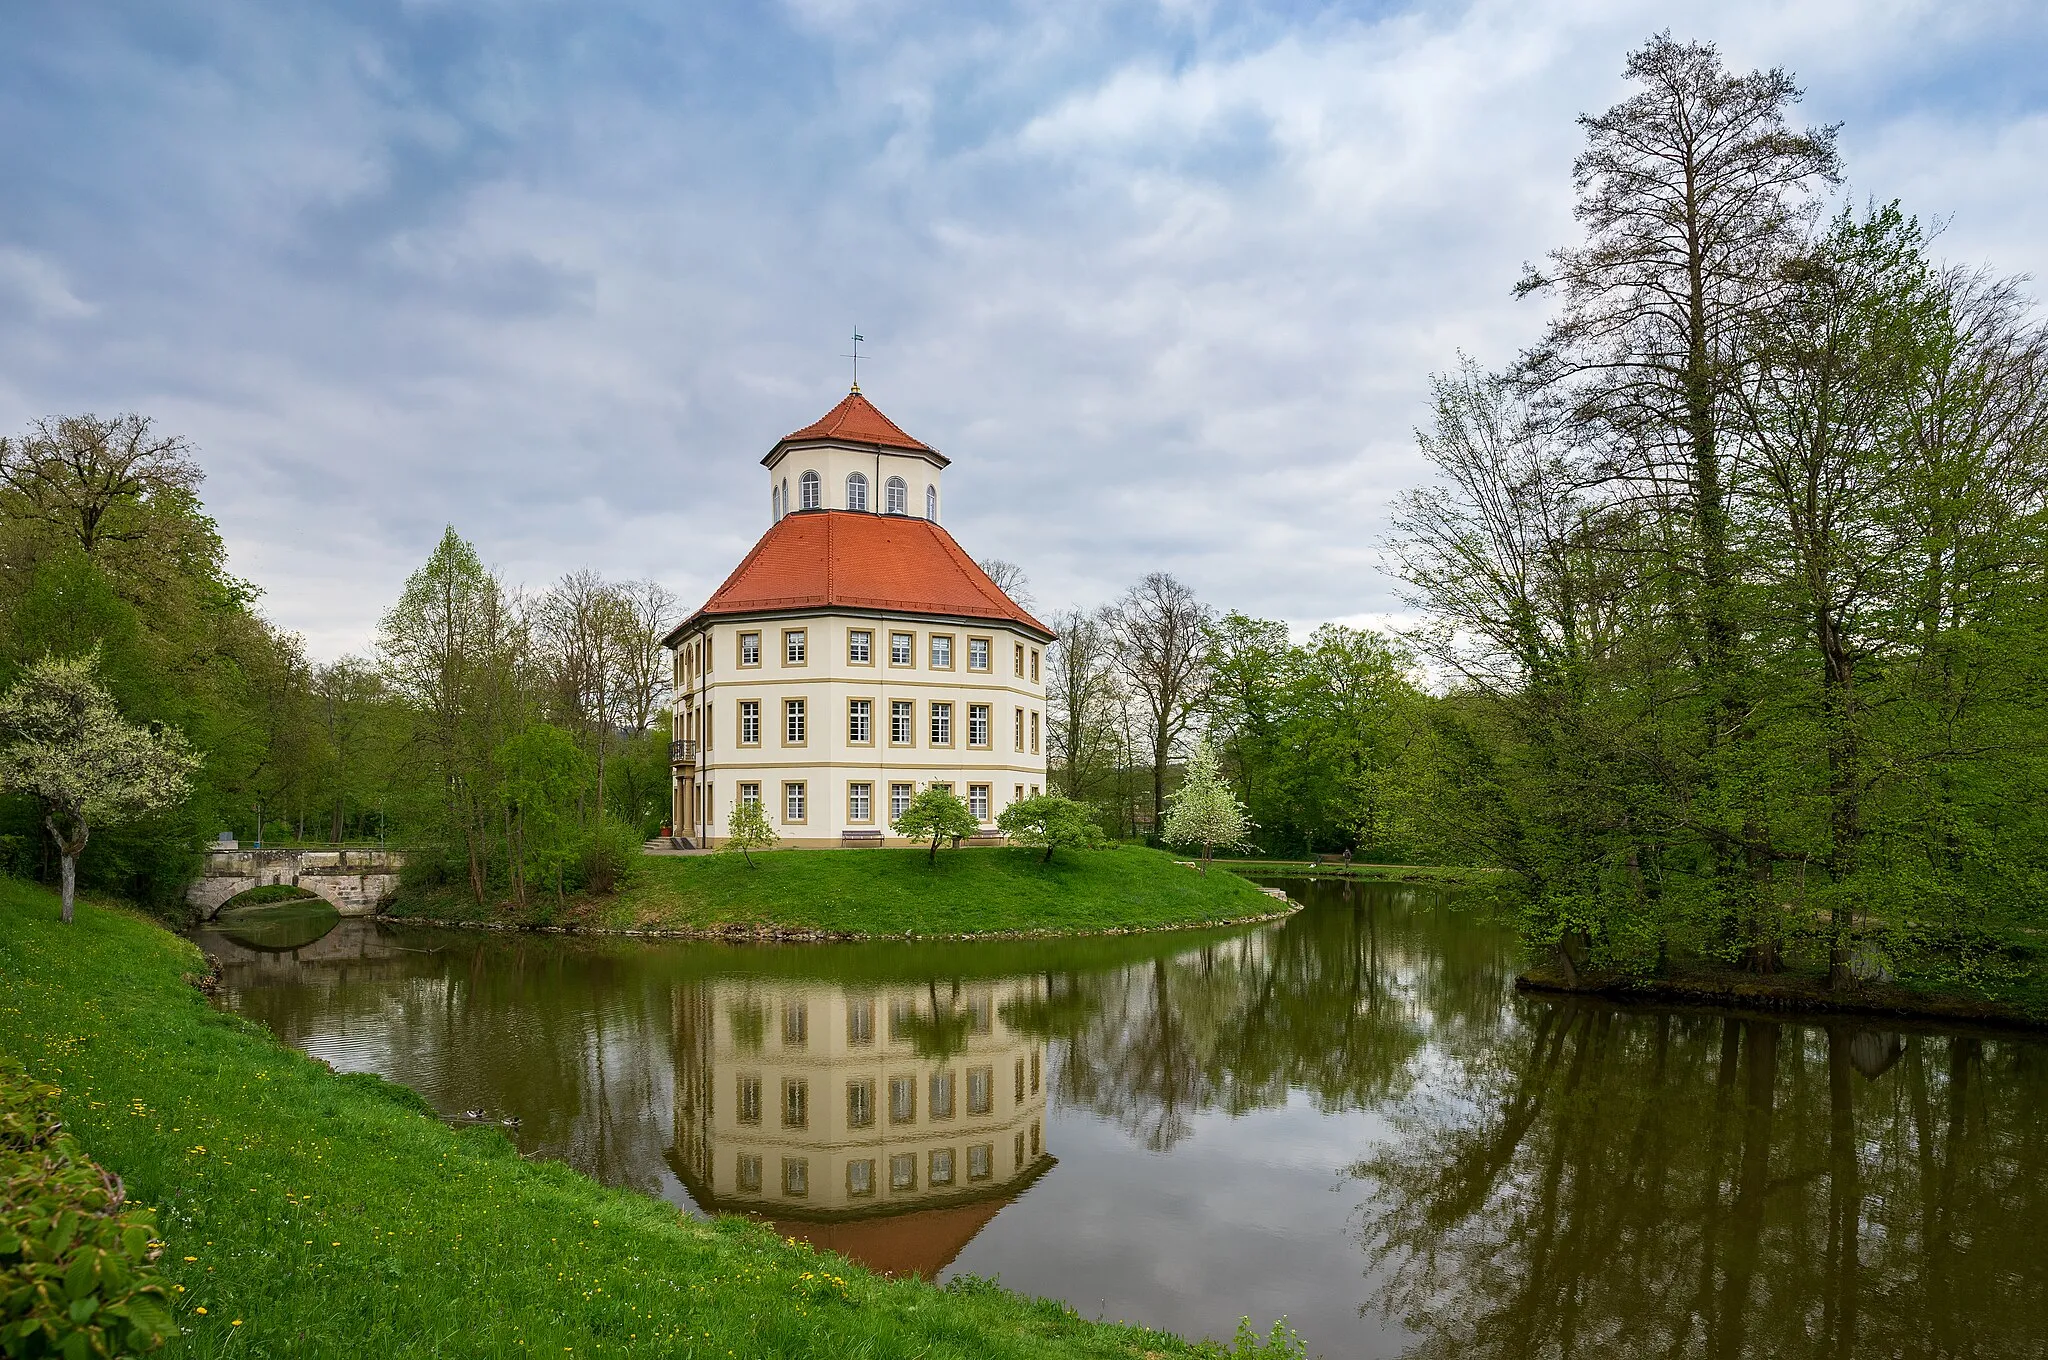 Photo showing: Oppenweiler, Germany: The octogonal residential castle set on a lake, built in 1782, today the townhall. Seen from south south-west from the castle gardens which were laid out at the same time. At the left you can see the bridge which is the only access to the castle.